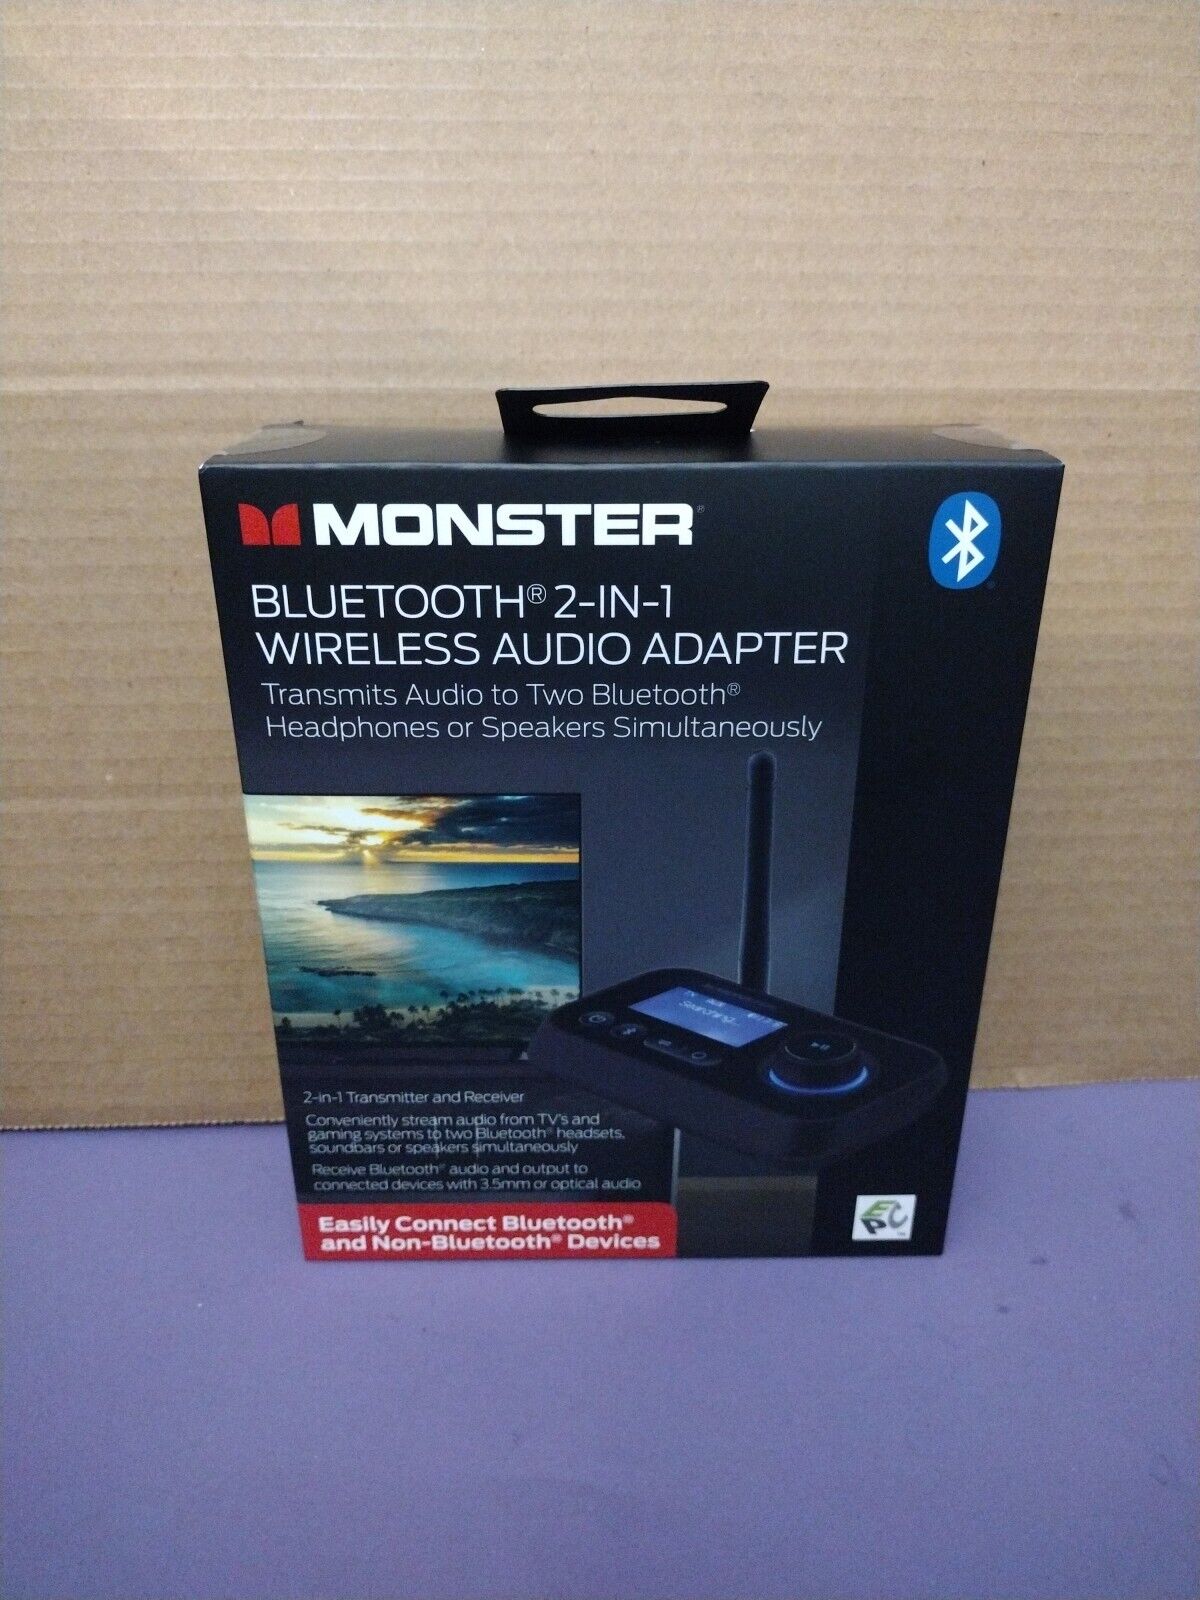 MONSTER - Bluetooth 2-IN-1 Wireless Audio Adapter - New  